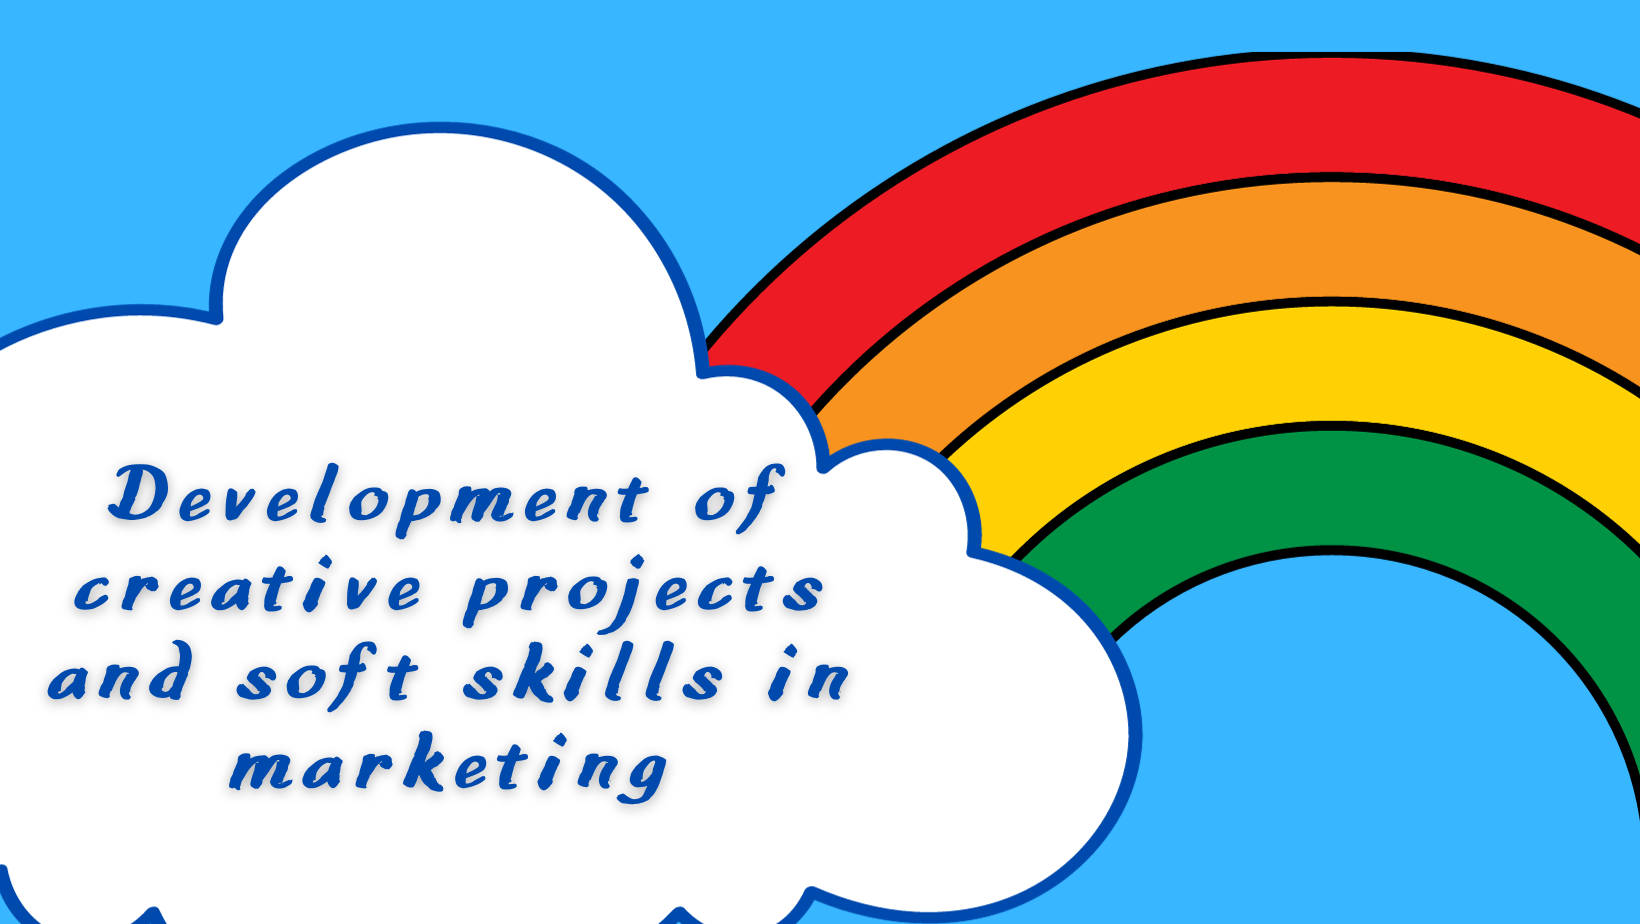 Development of creative projects and soft skills in marketing